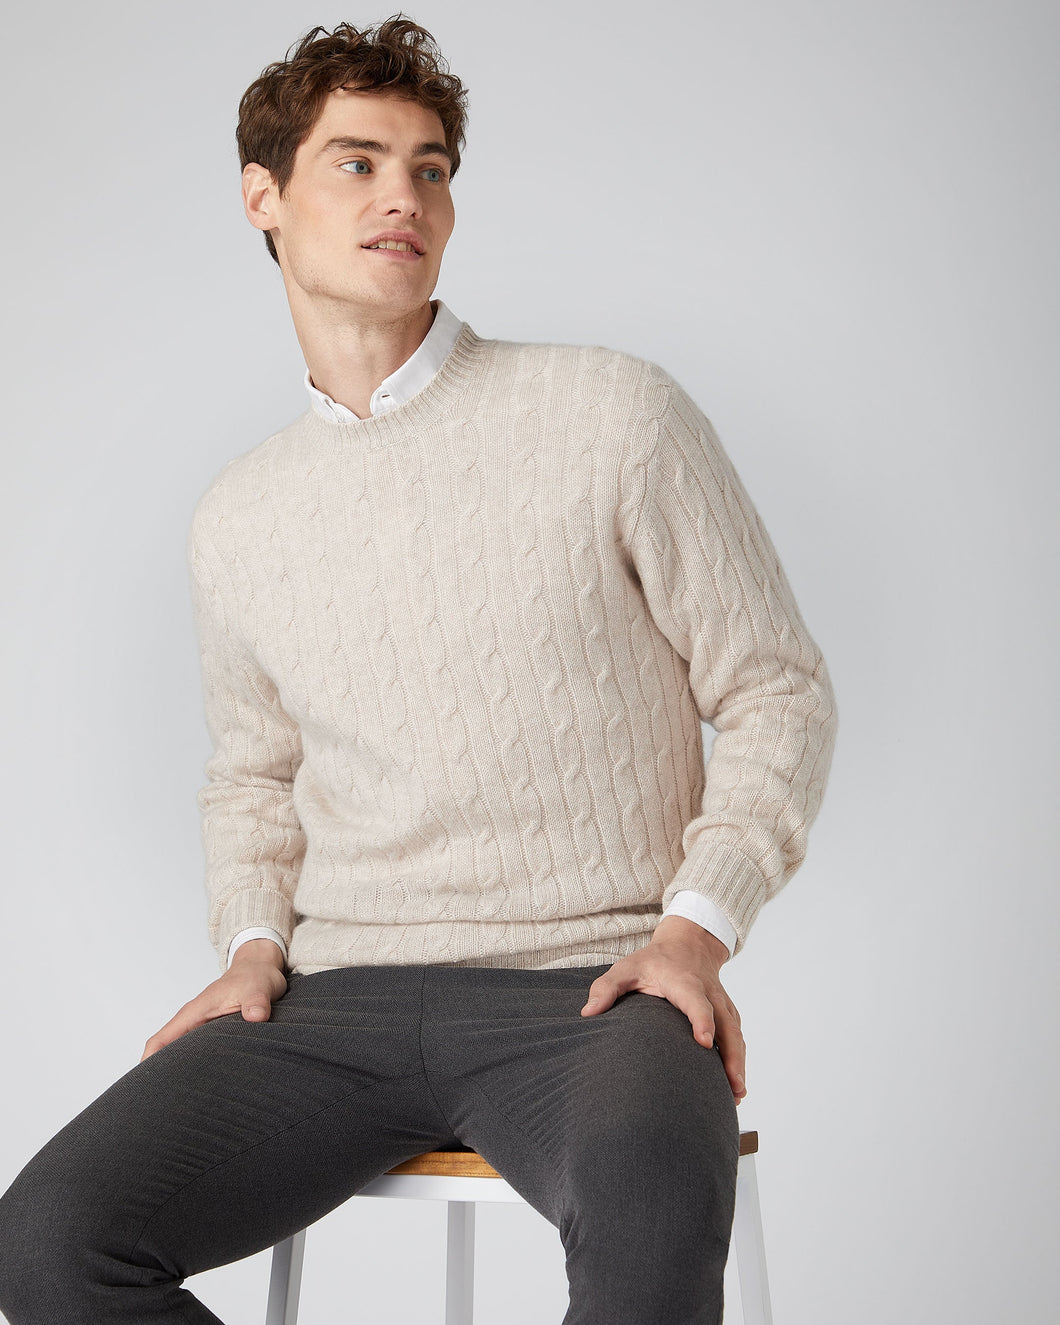 N.Peal Men's The Thames Cable Cashmere Jumper Heather Beige Brown